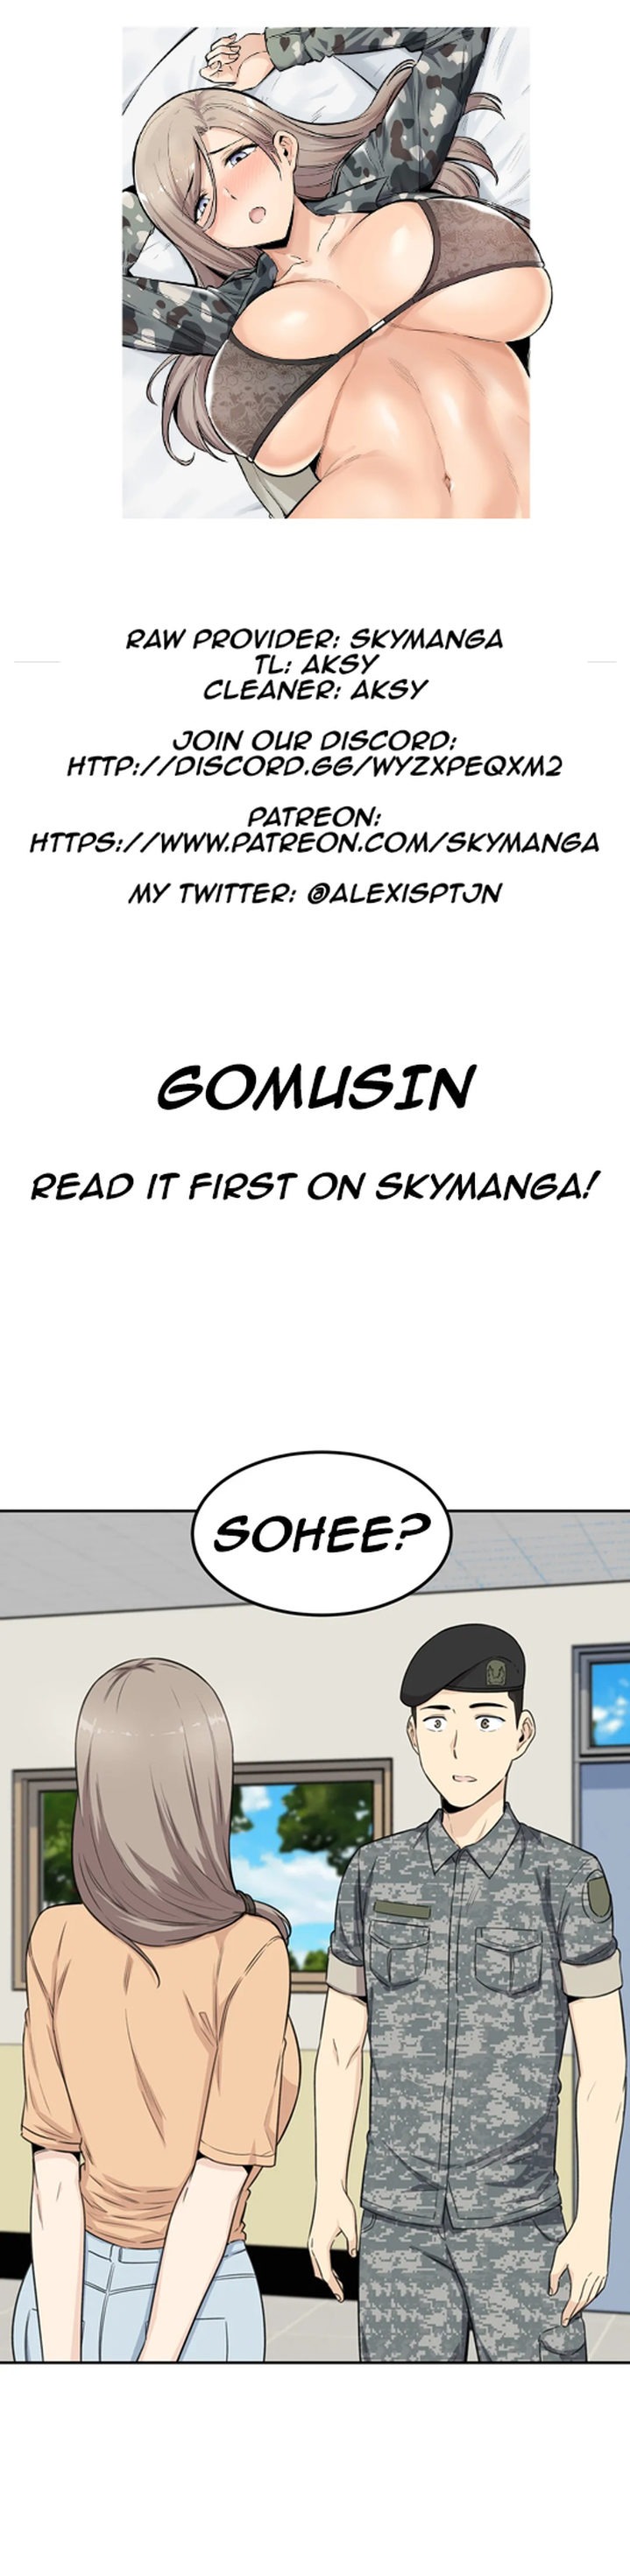 Gomusin - Chapter 3 Page 1